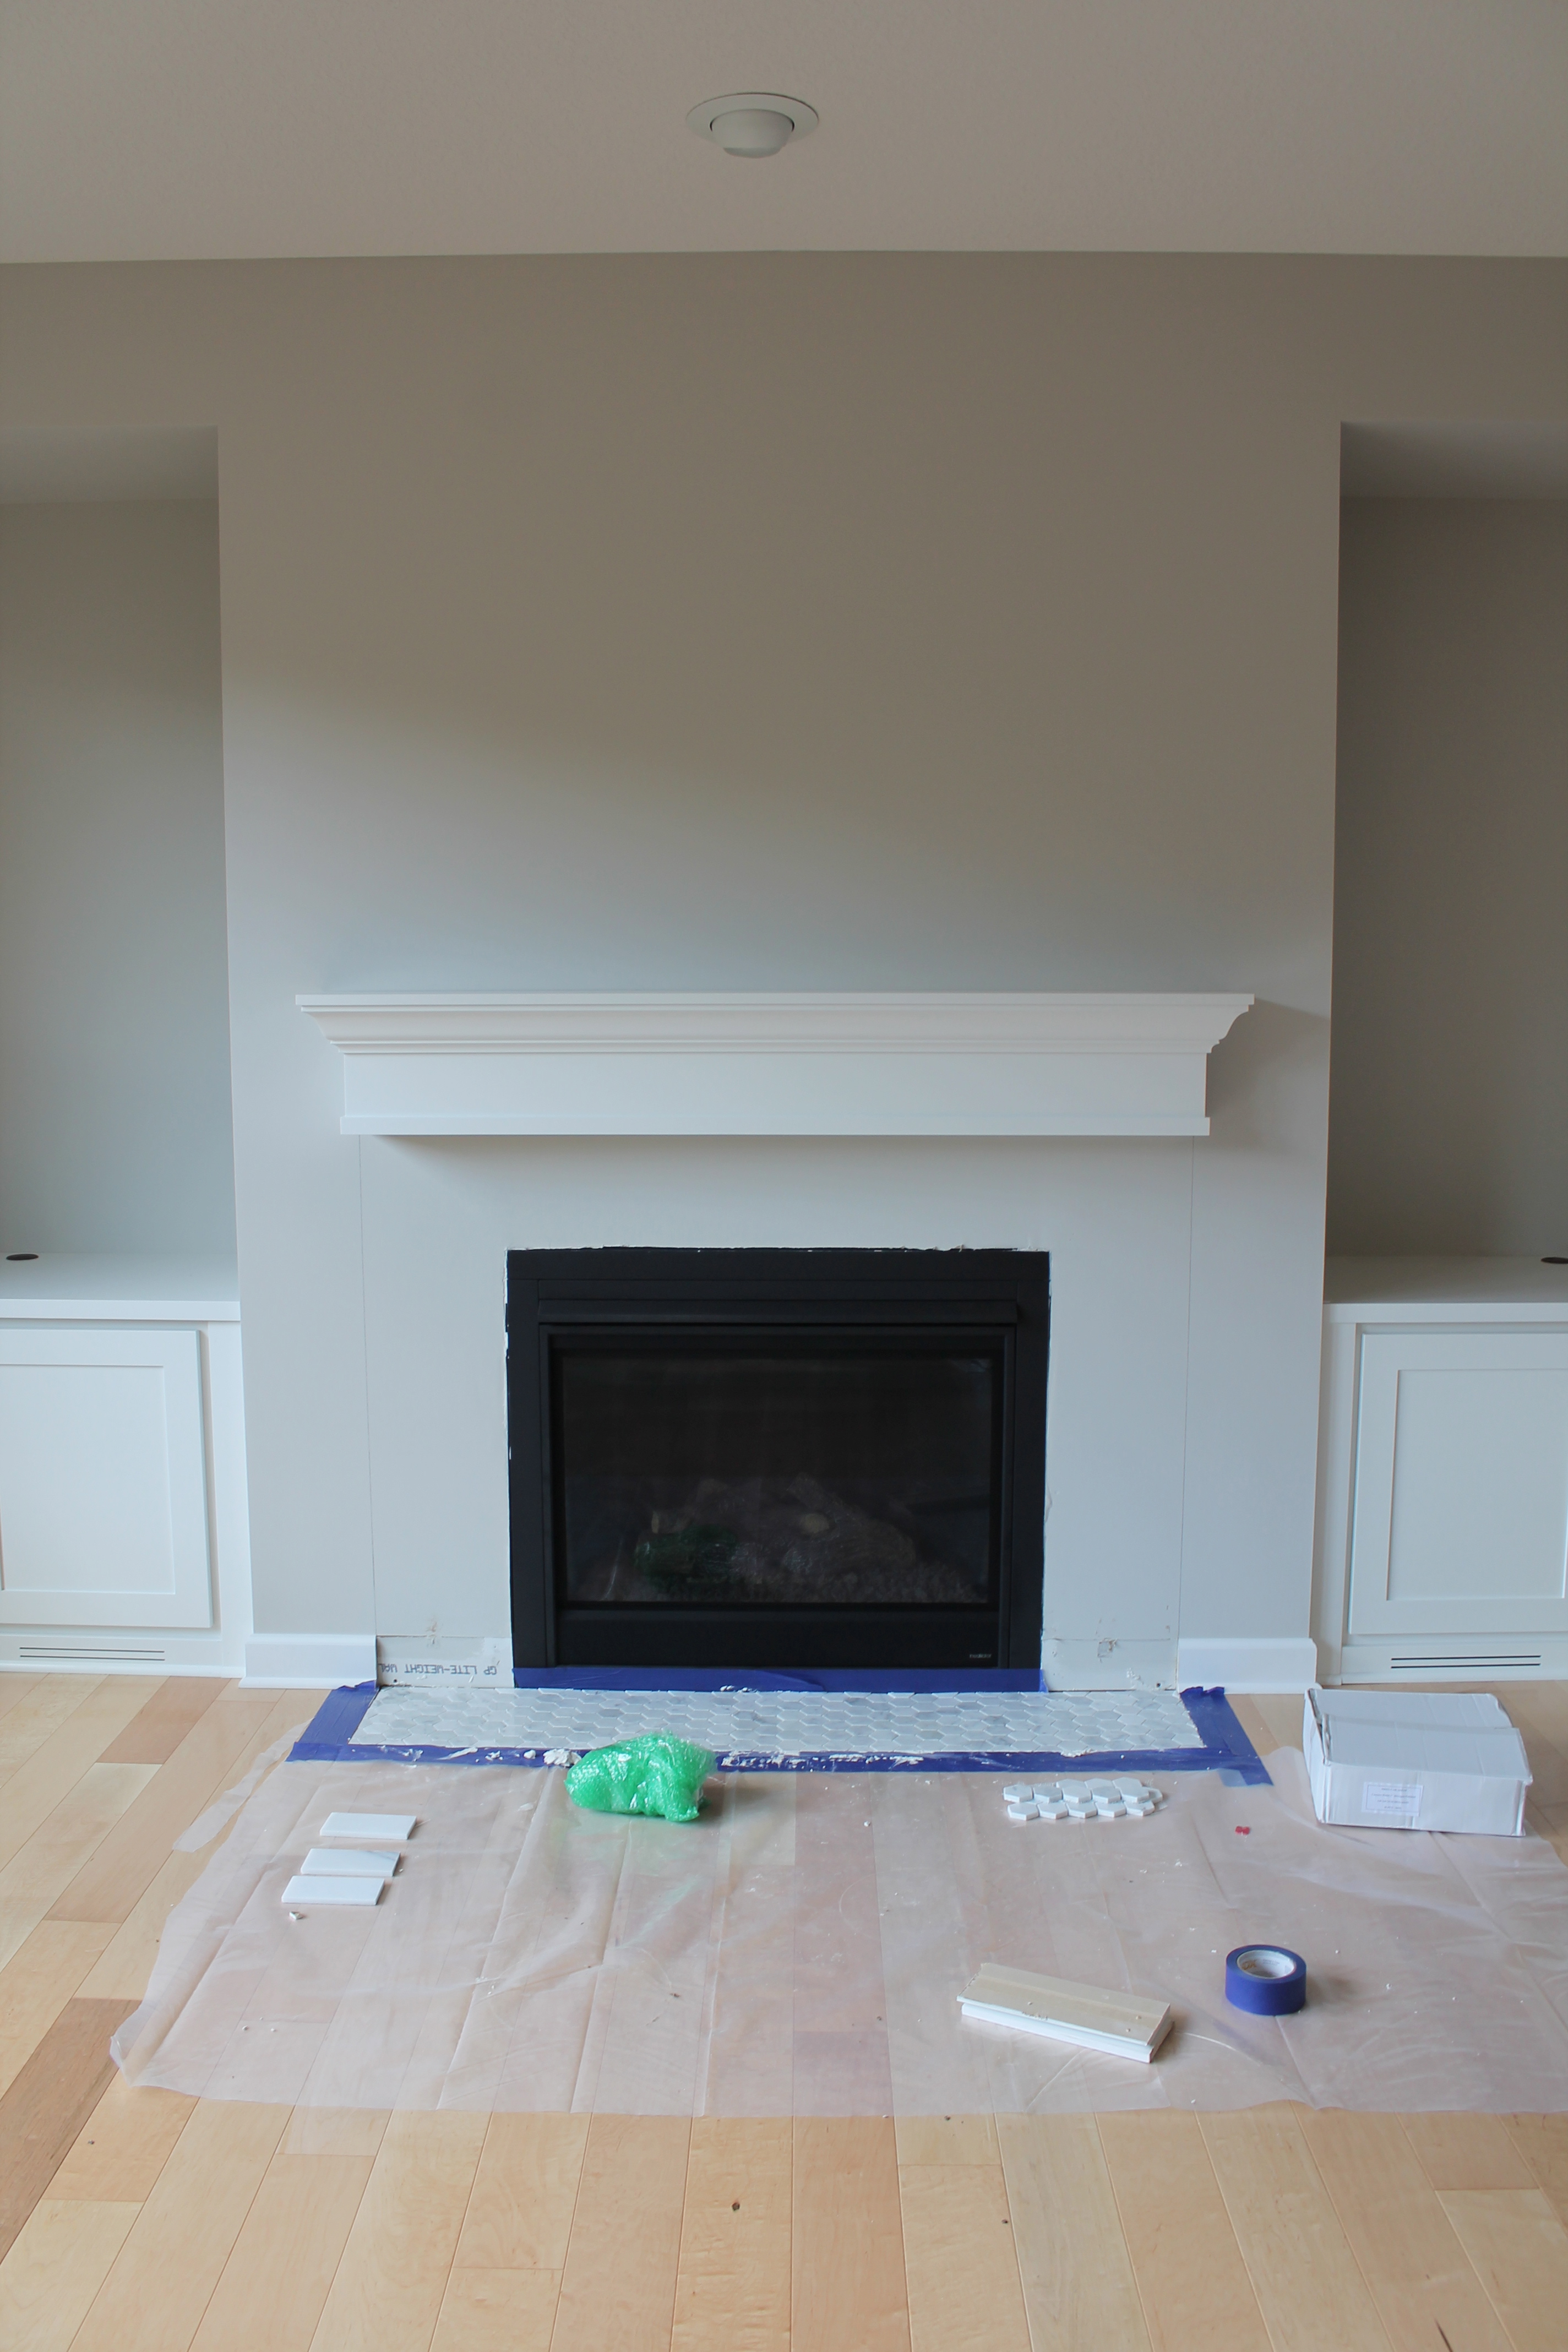 Marble tiles are a common way to add beauty to fireplaces. White is always a marketable and classic color. It is a bright color that reflects light and cleanliness. And marble is an ideal material for low traffic areas like fireplace surrounds. So this ti